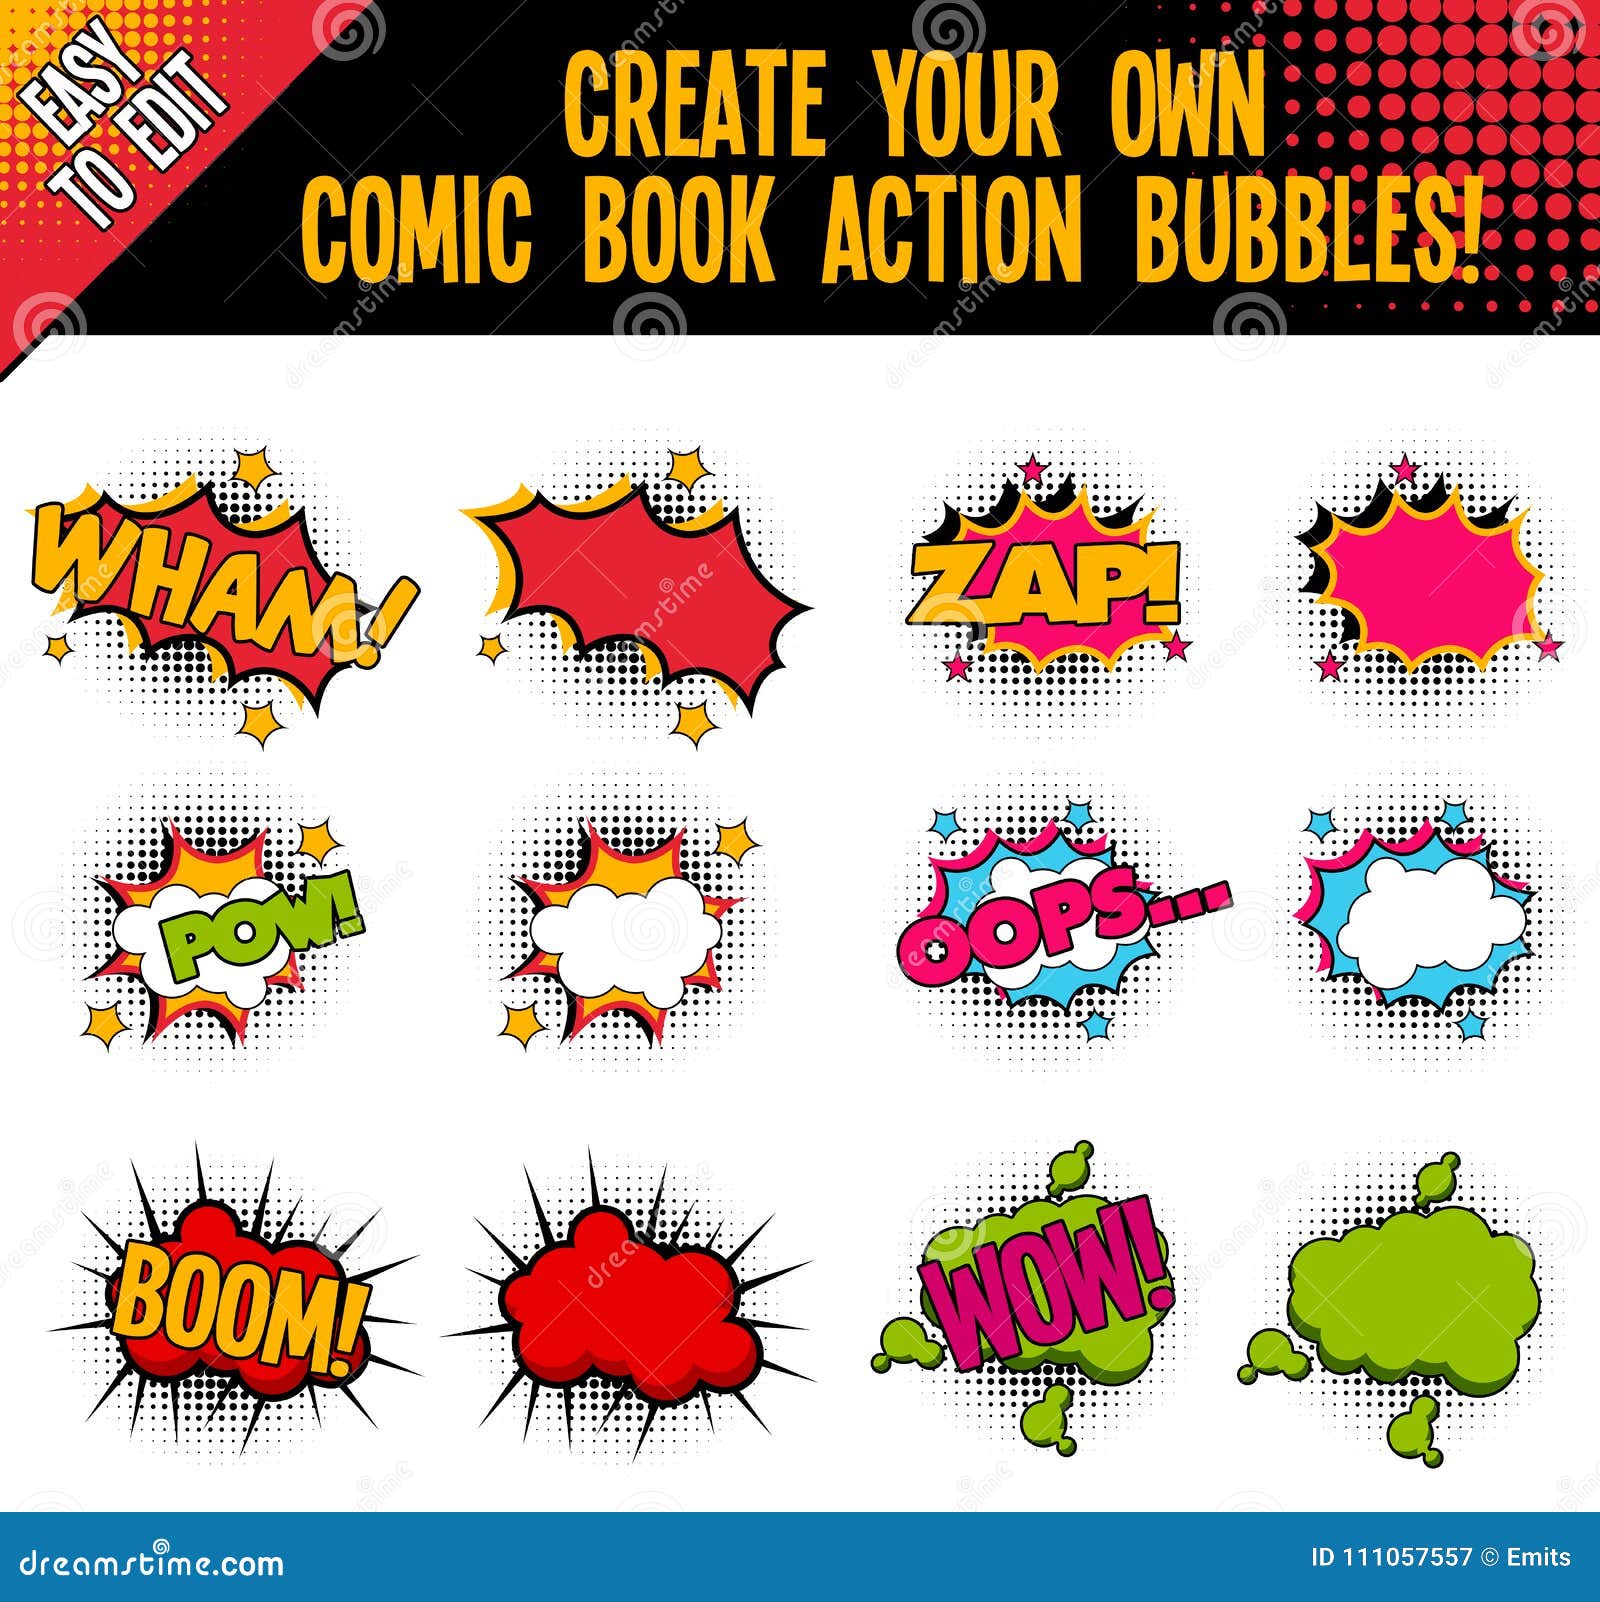 comic book style action bubbles with halftone effect